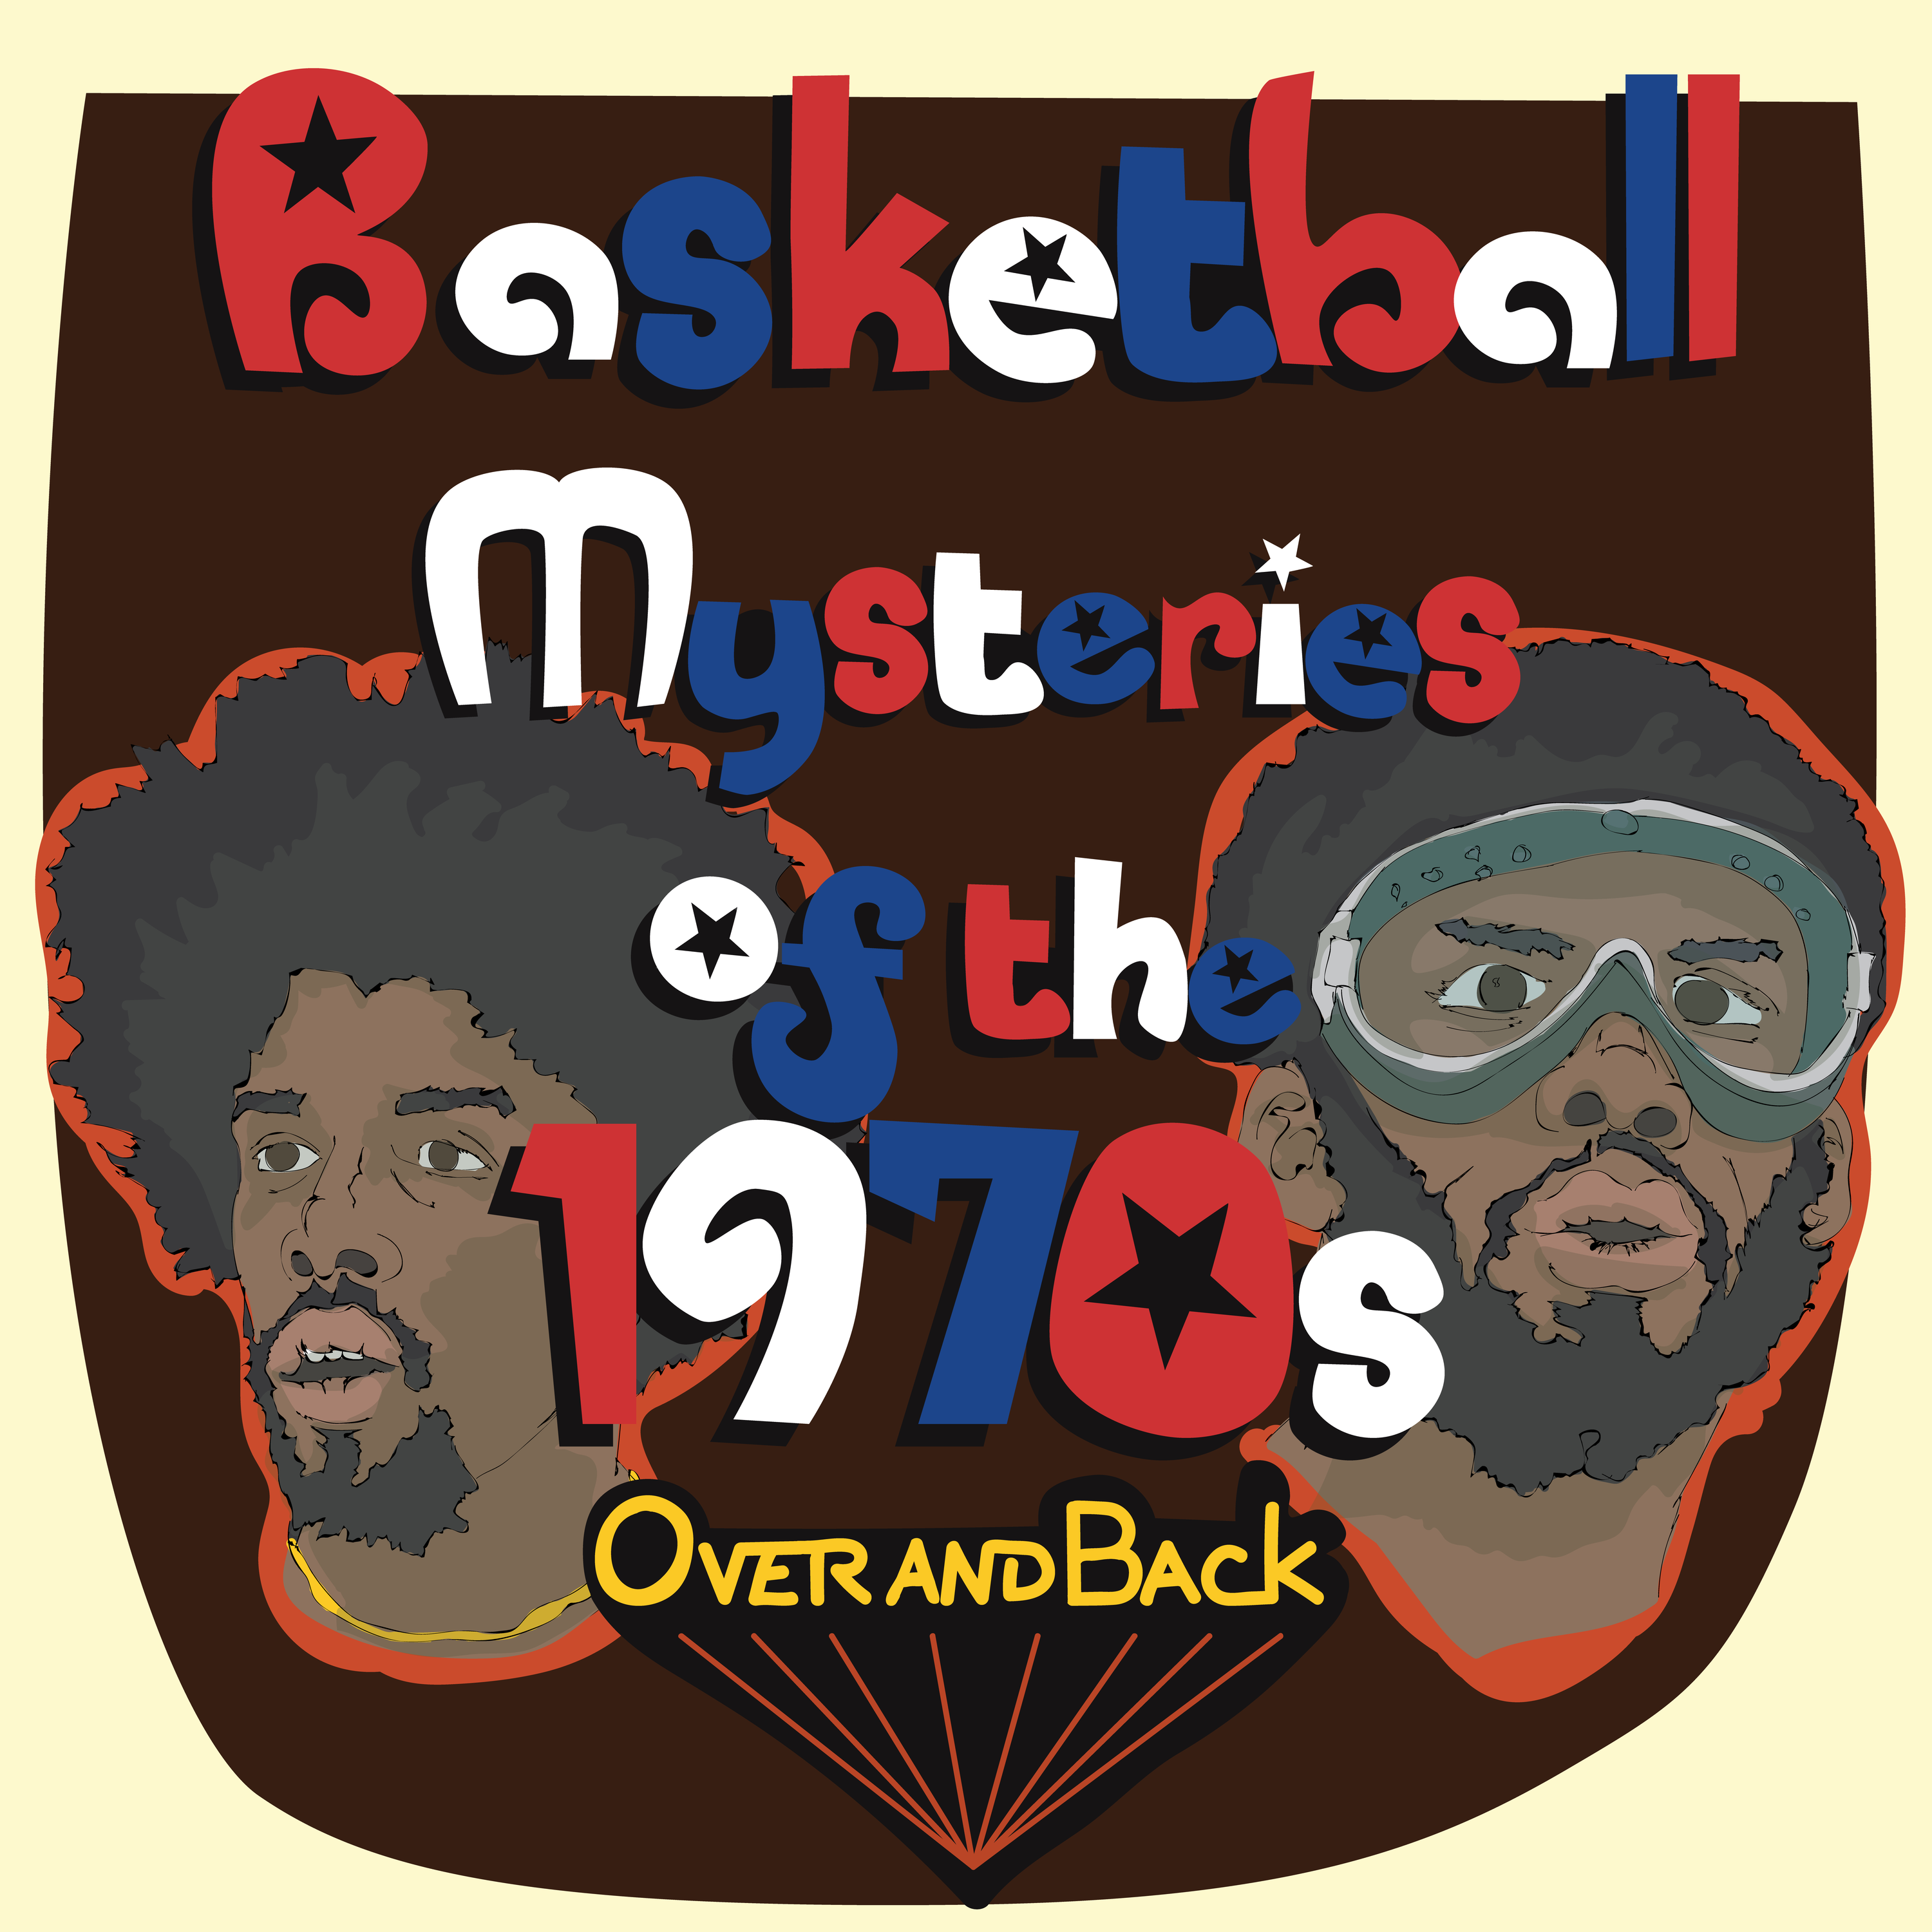 Was Abdul-Jabbar vs. Walton the great lost rivalry? (Basketball Mysteries of the 1970s #30)